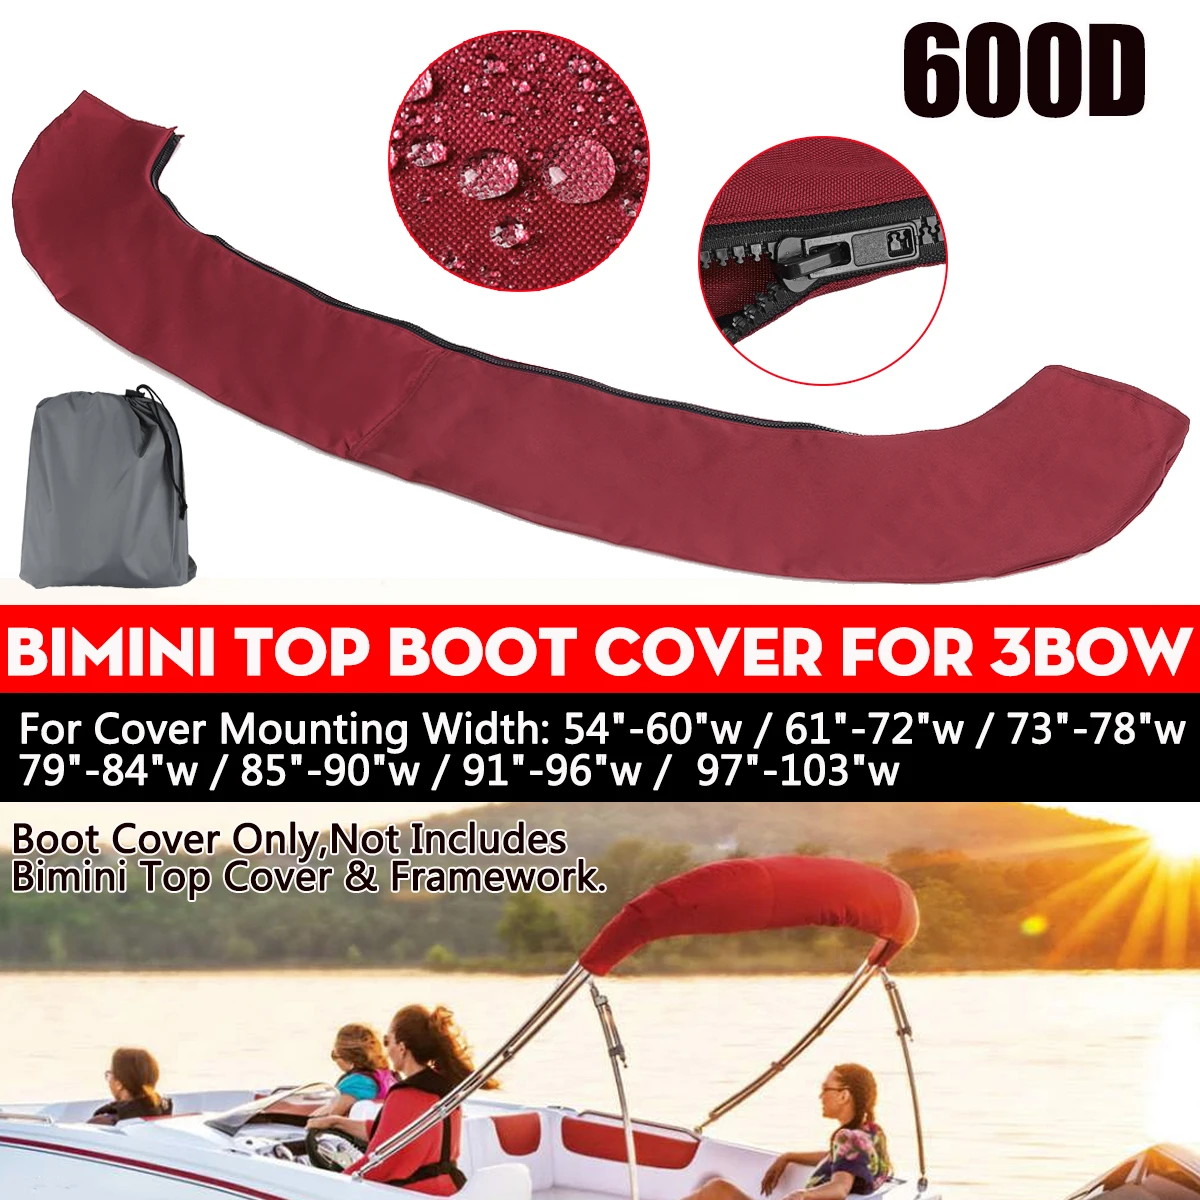 600D 3 Bow Bimini Top Boot Cover No Frame Waterproof Yacht Boat Cover with Zipper Anti UV Dustproof Cover Marine Accessories telesin protective bag storage case zipper carry bag semi open ip54 waterproof